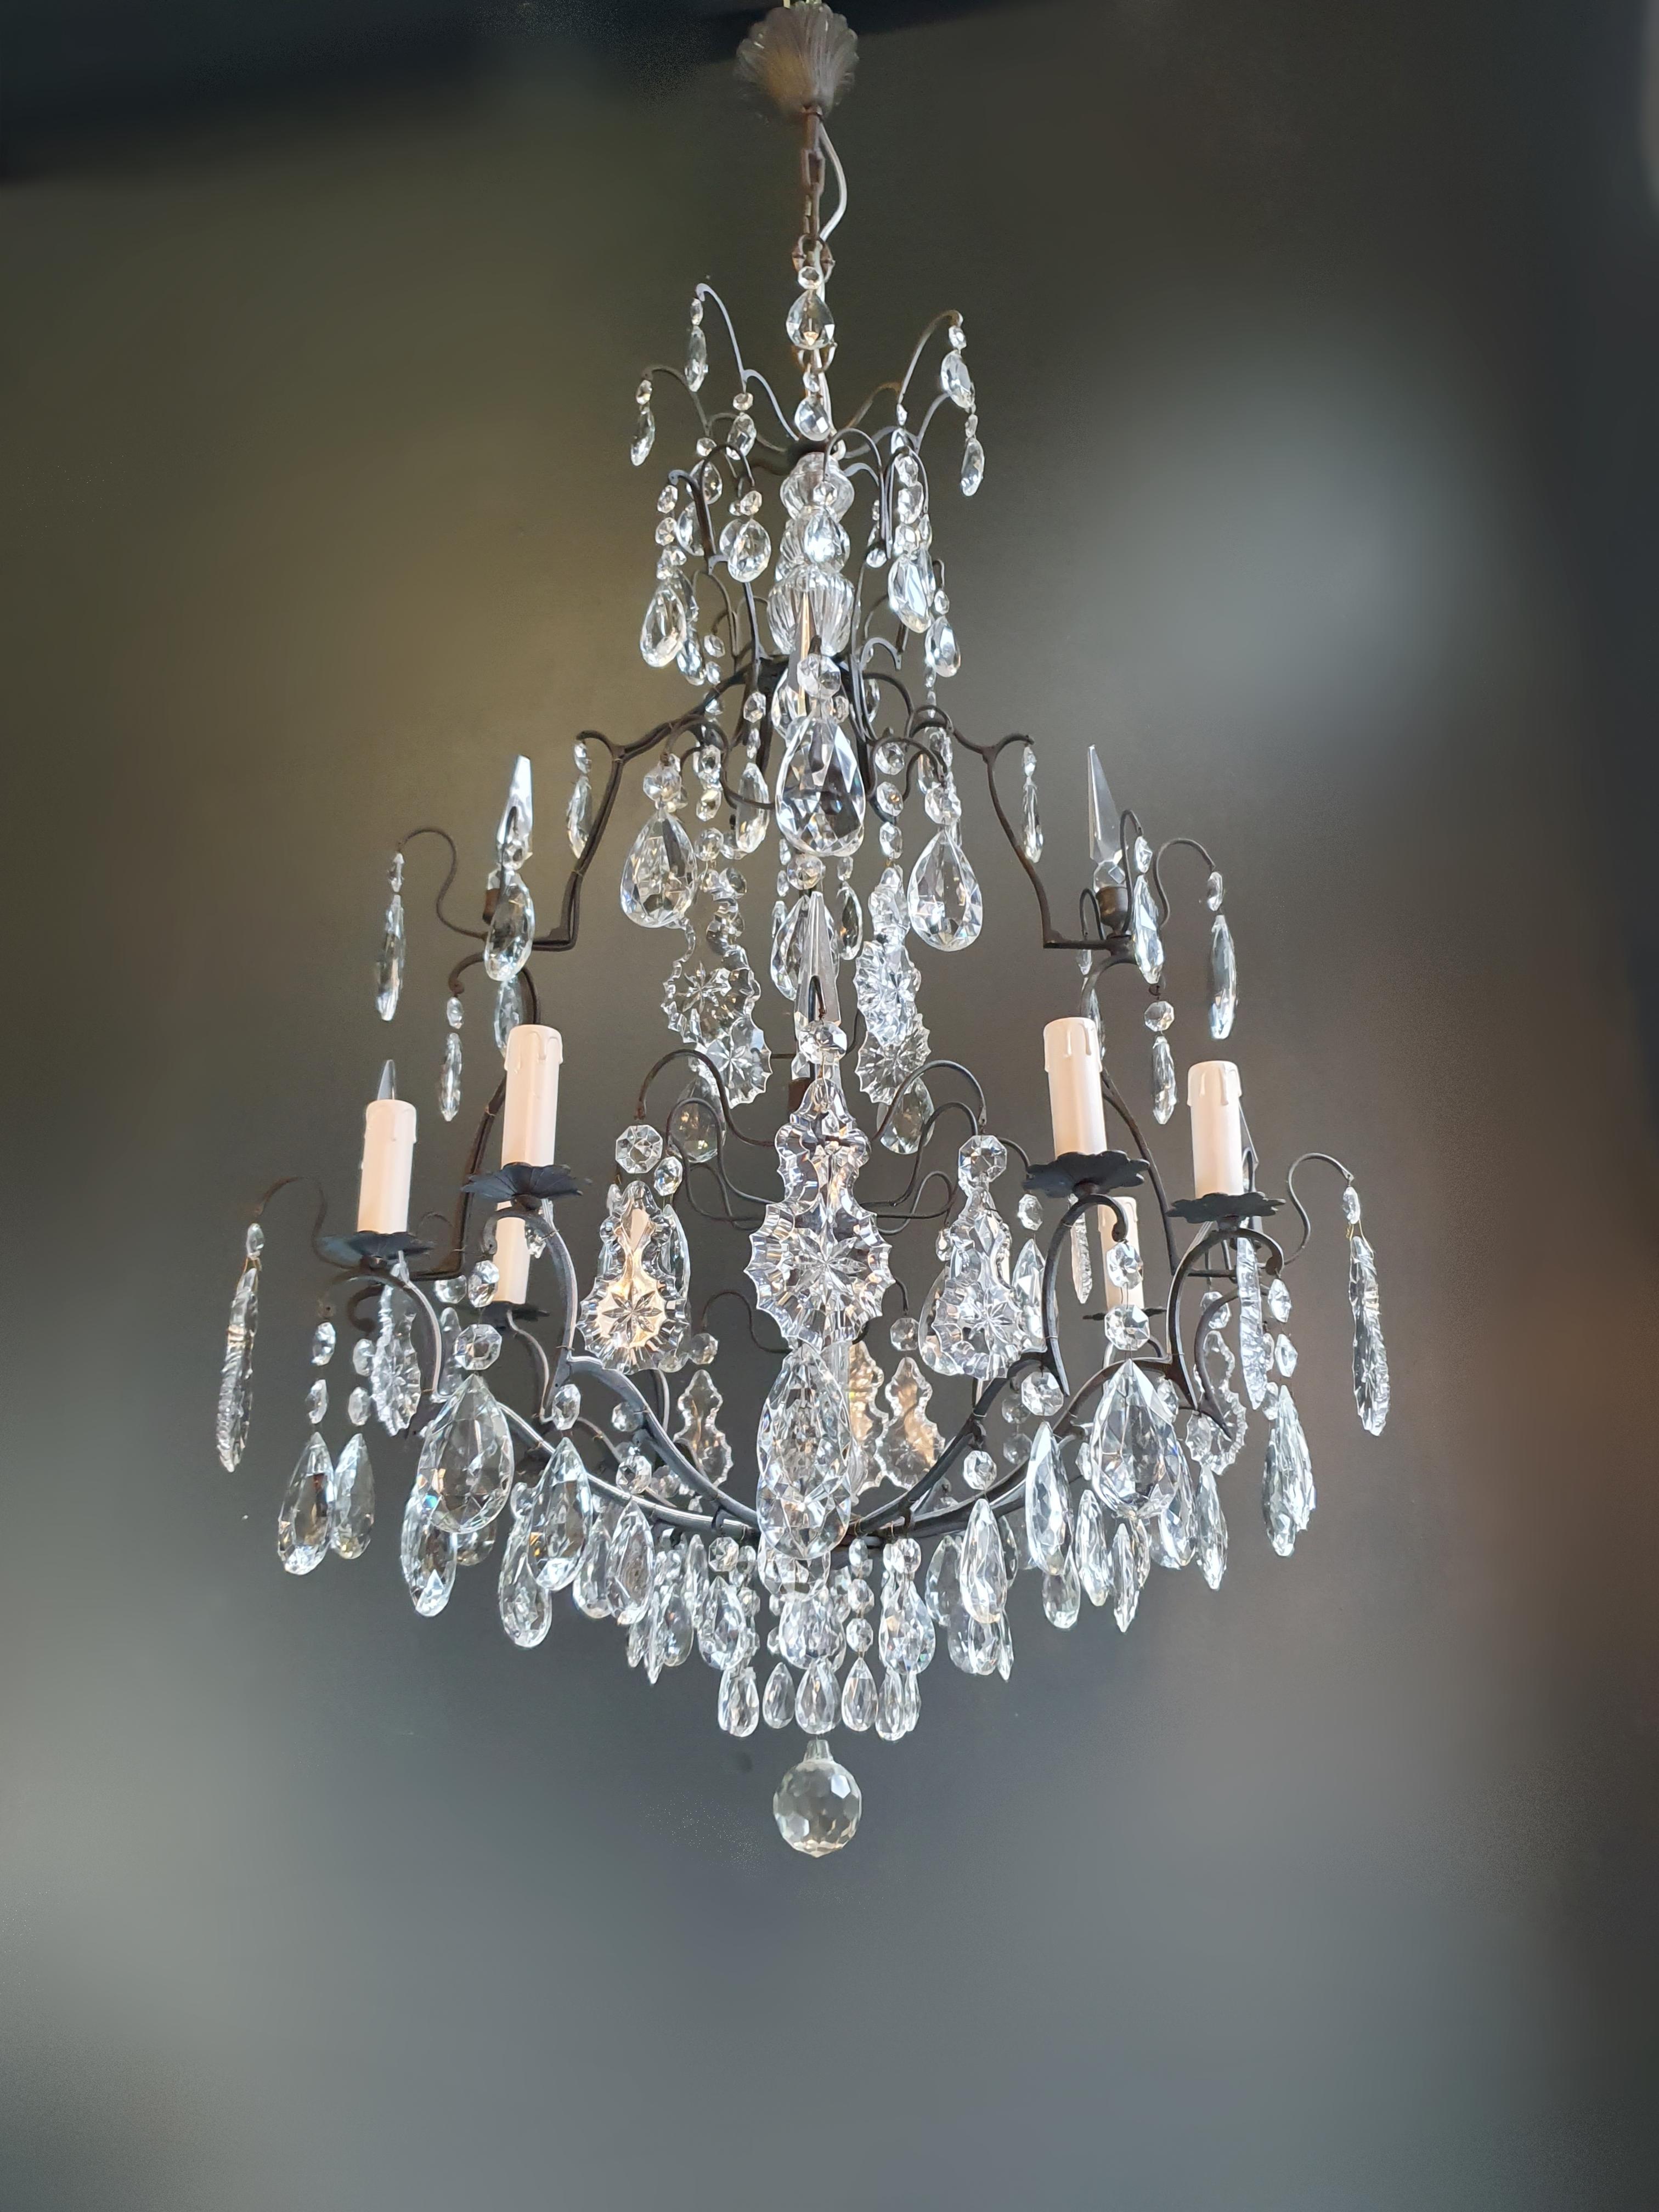 old chandelier with love and professionally restored in Berlin. electrical wiring works in the US.
Re-wired and ready to hang
not one missing
Cabling completely renewed. Crystal, hand-knotted.
Measures: Total height 120 cm, height without chain 105